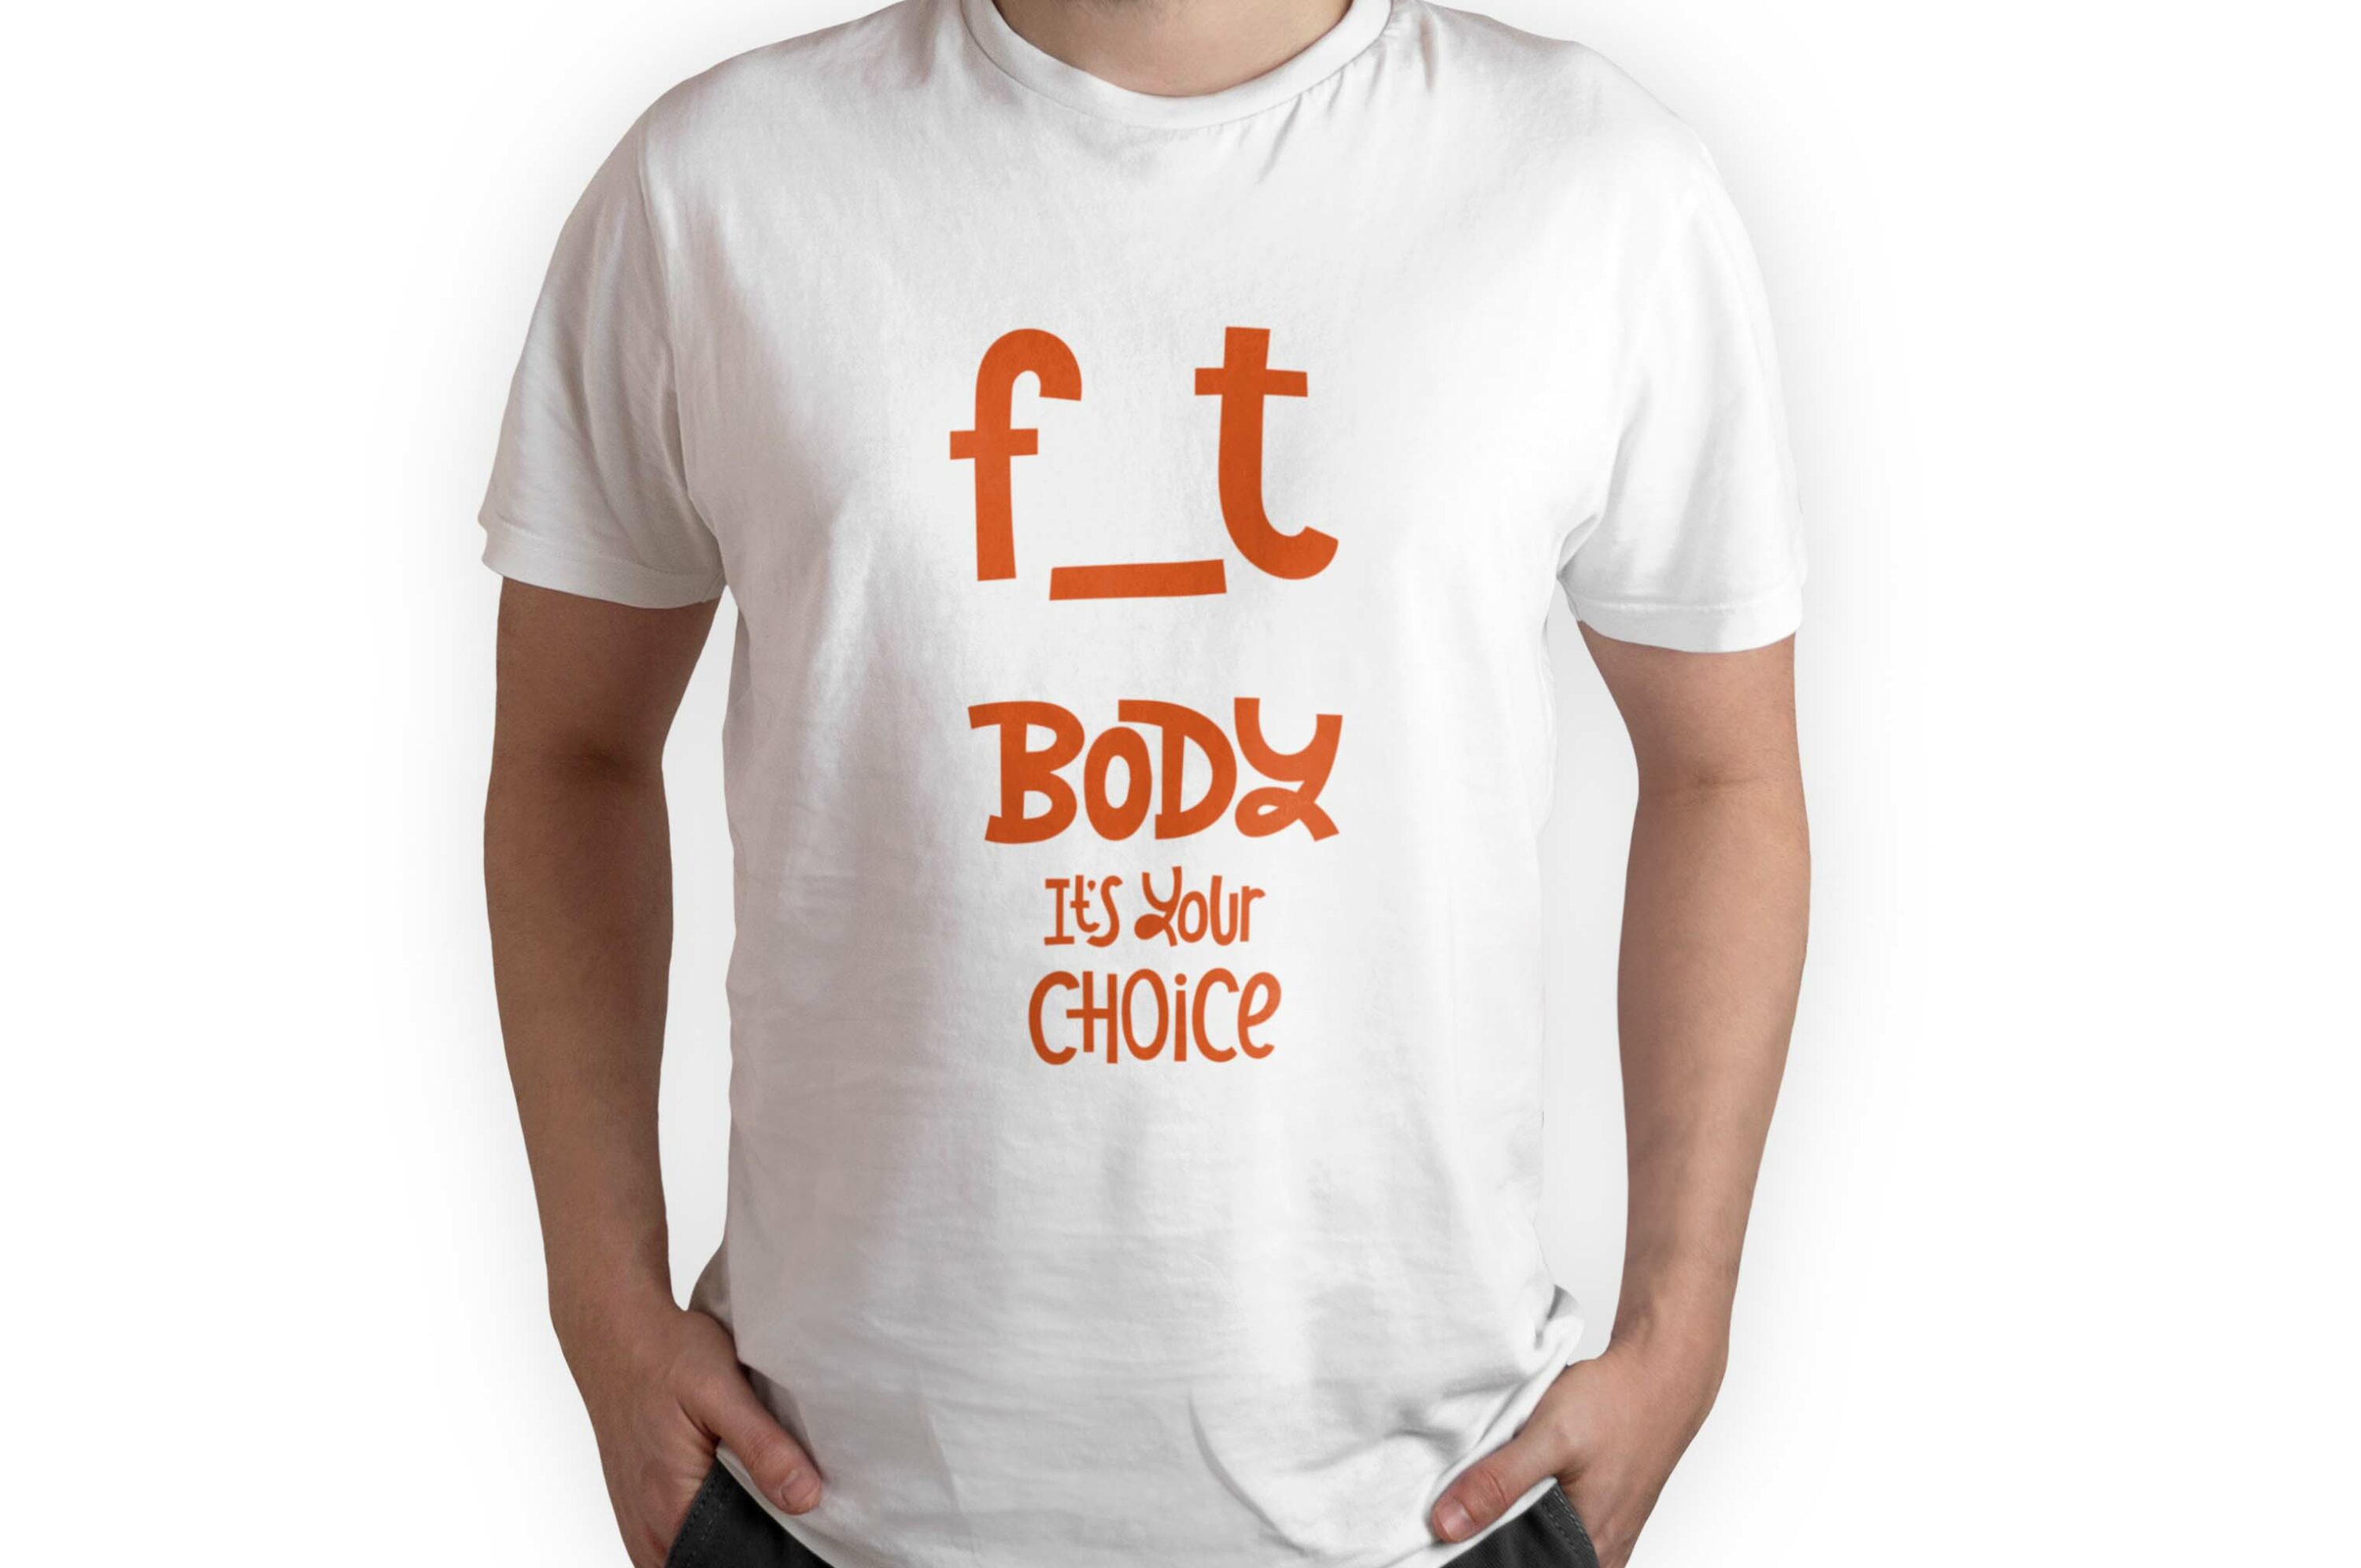 Bundle of 156 T-shirt Designs with Fitness Quotes, orange f_t body it's your choice.